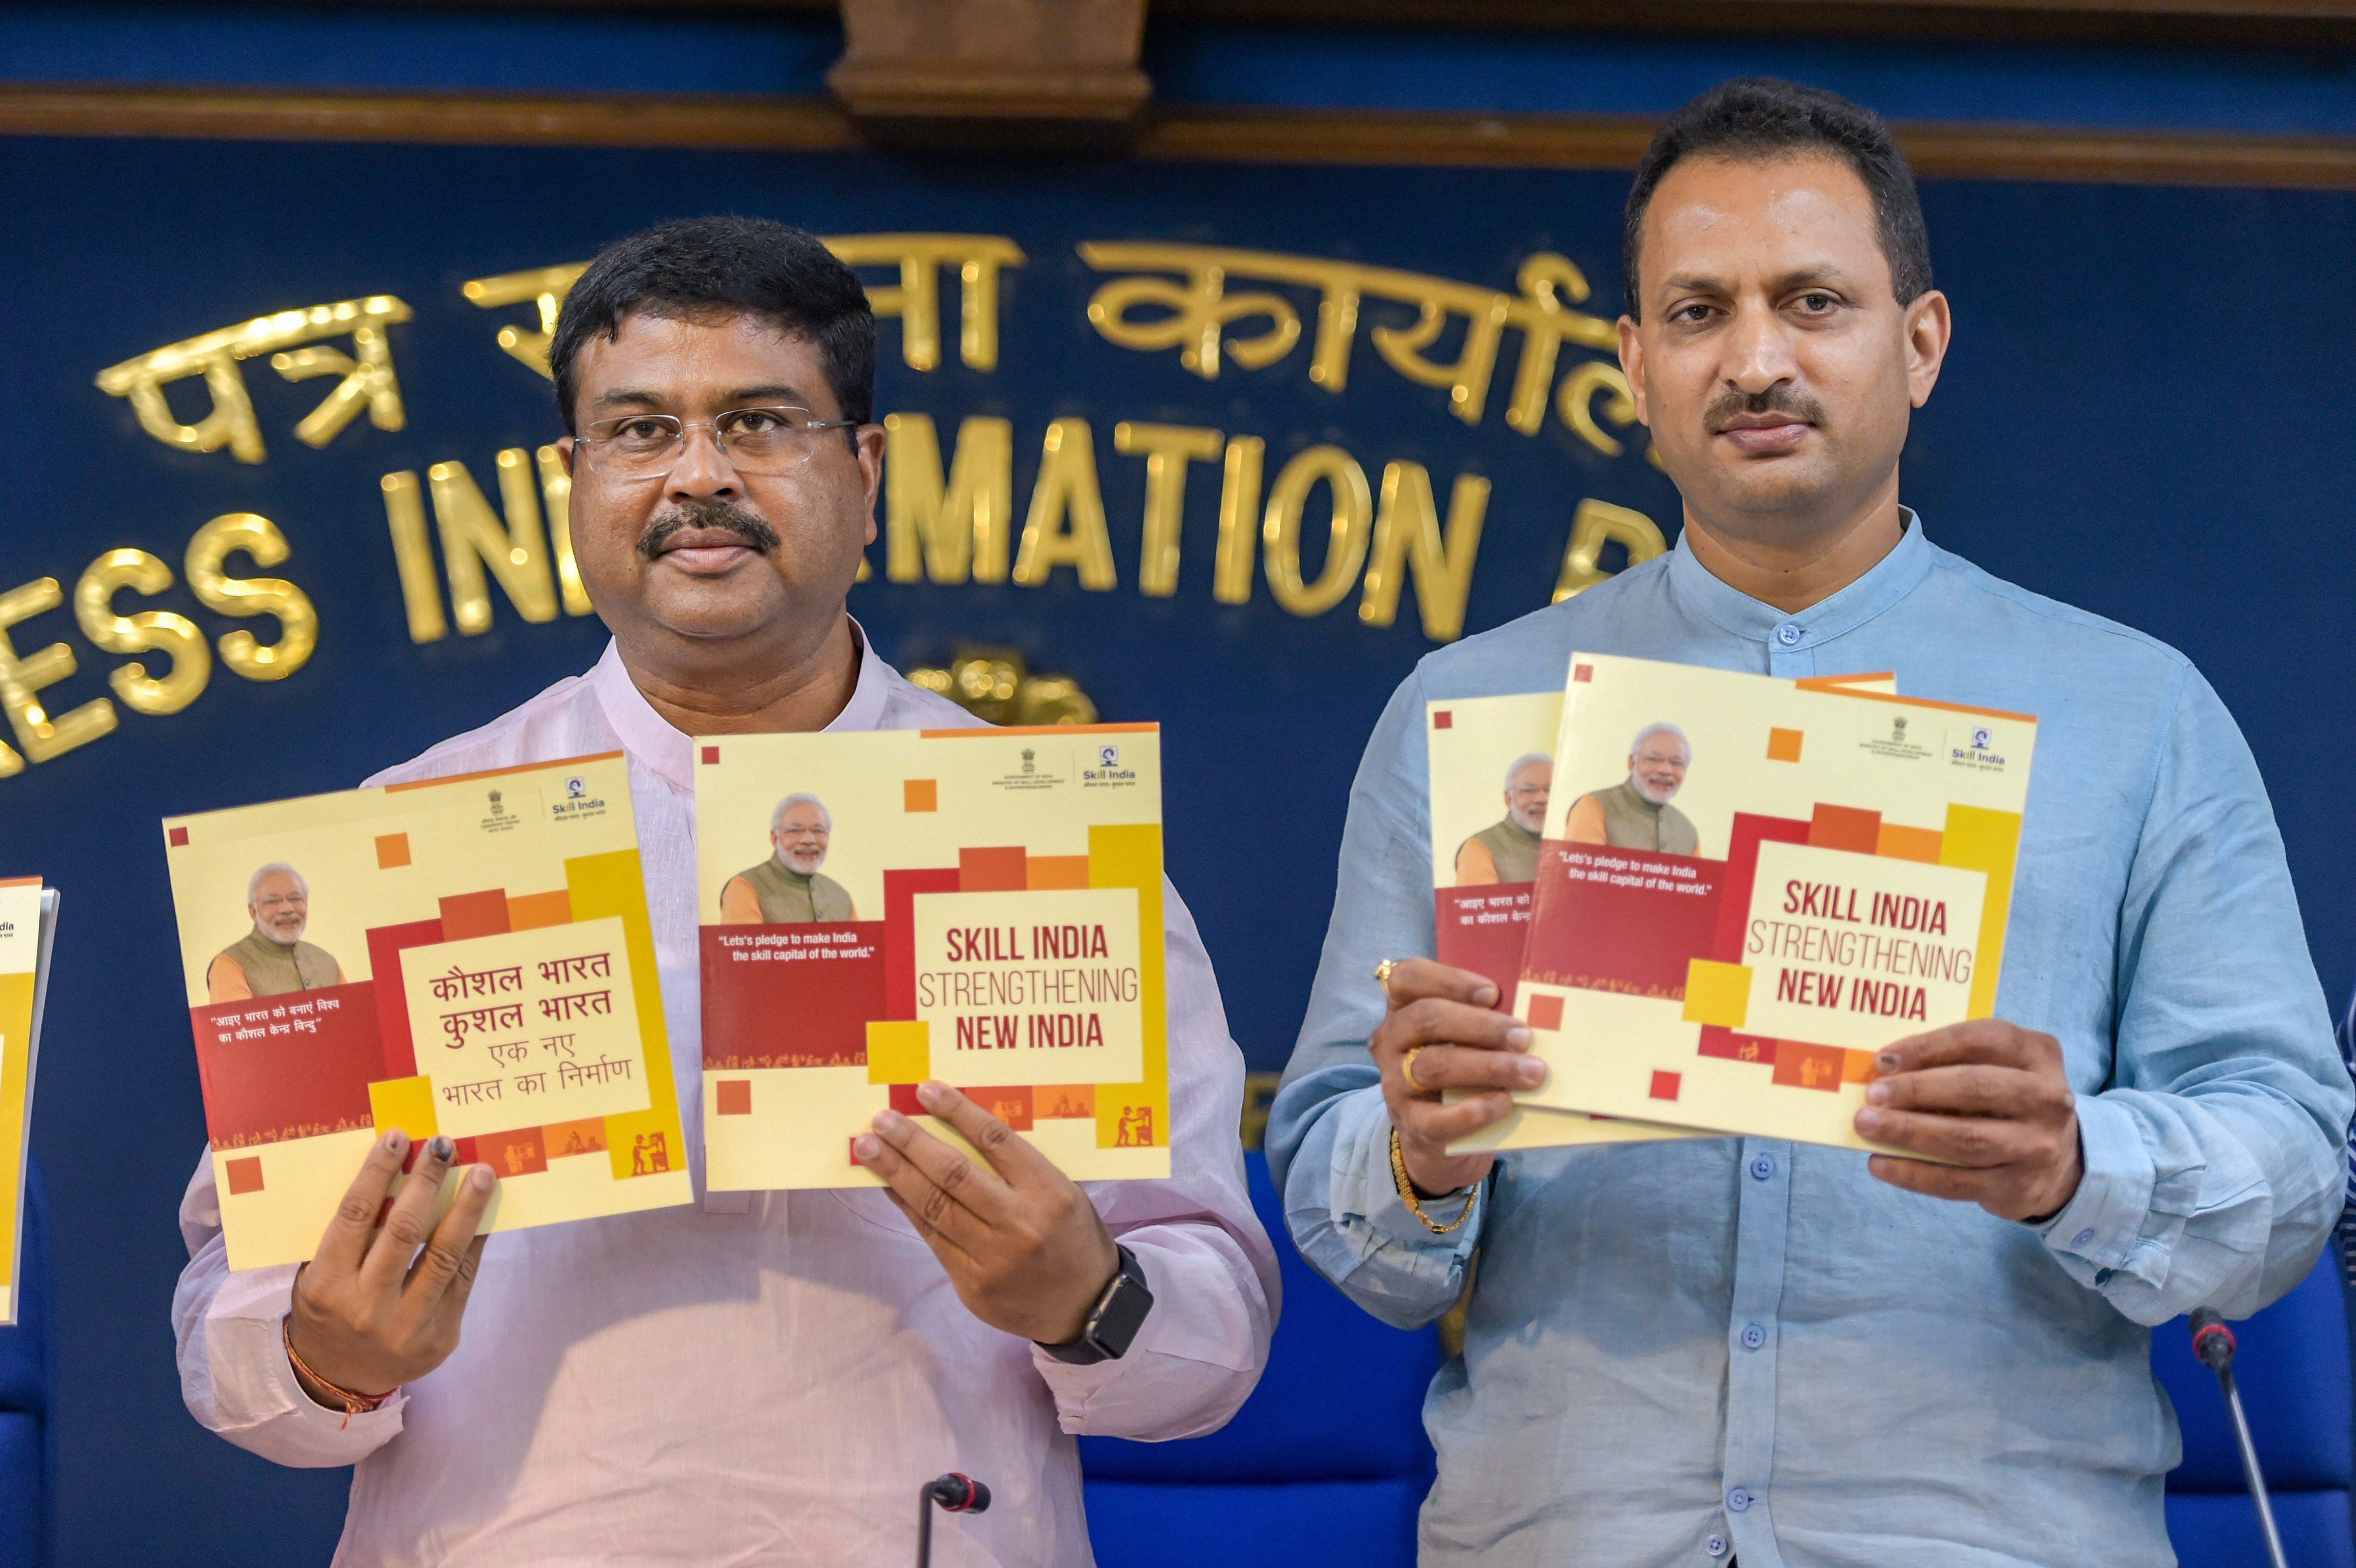 Union Minister for Petroleum, Natural Gas and Skill Development, Dharmendra Pradhan with MoS Anant Kumar Hegde (R) release booklets during a press conference on 48 months achievements and initiatives of his ministry under the NDA government rule, in New Delhi on Wednesday. PTI